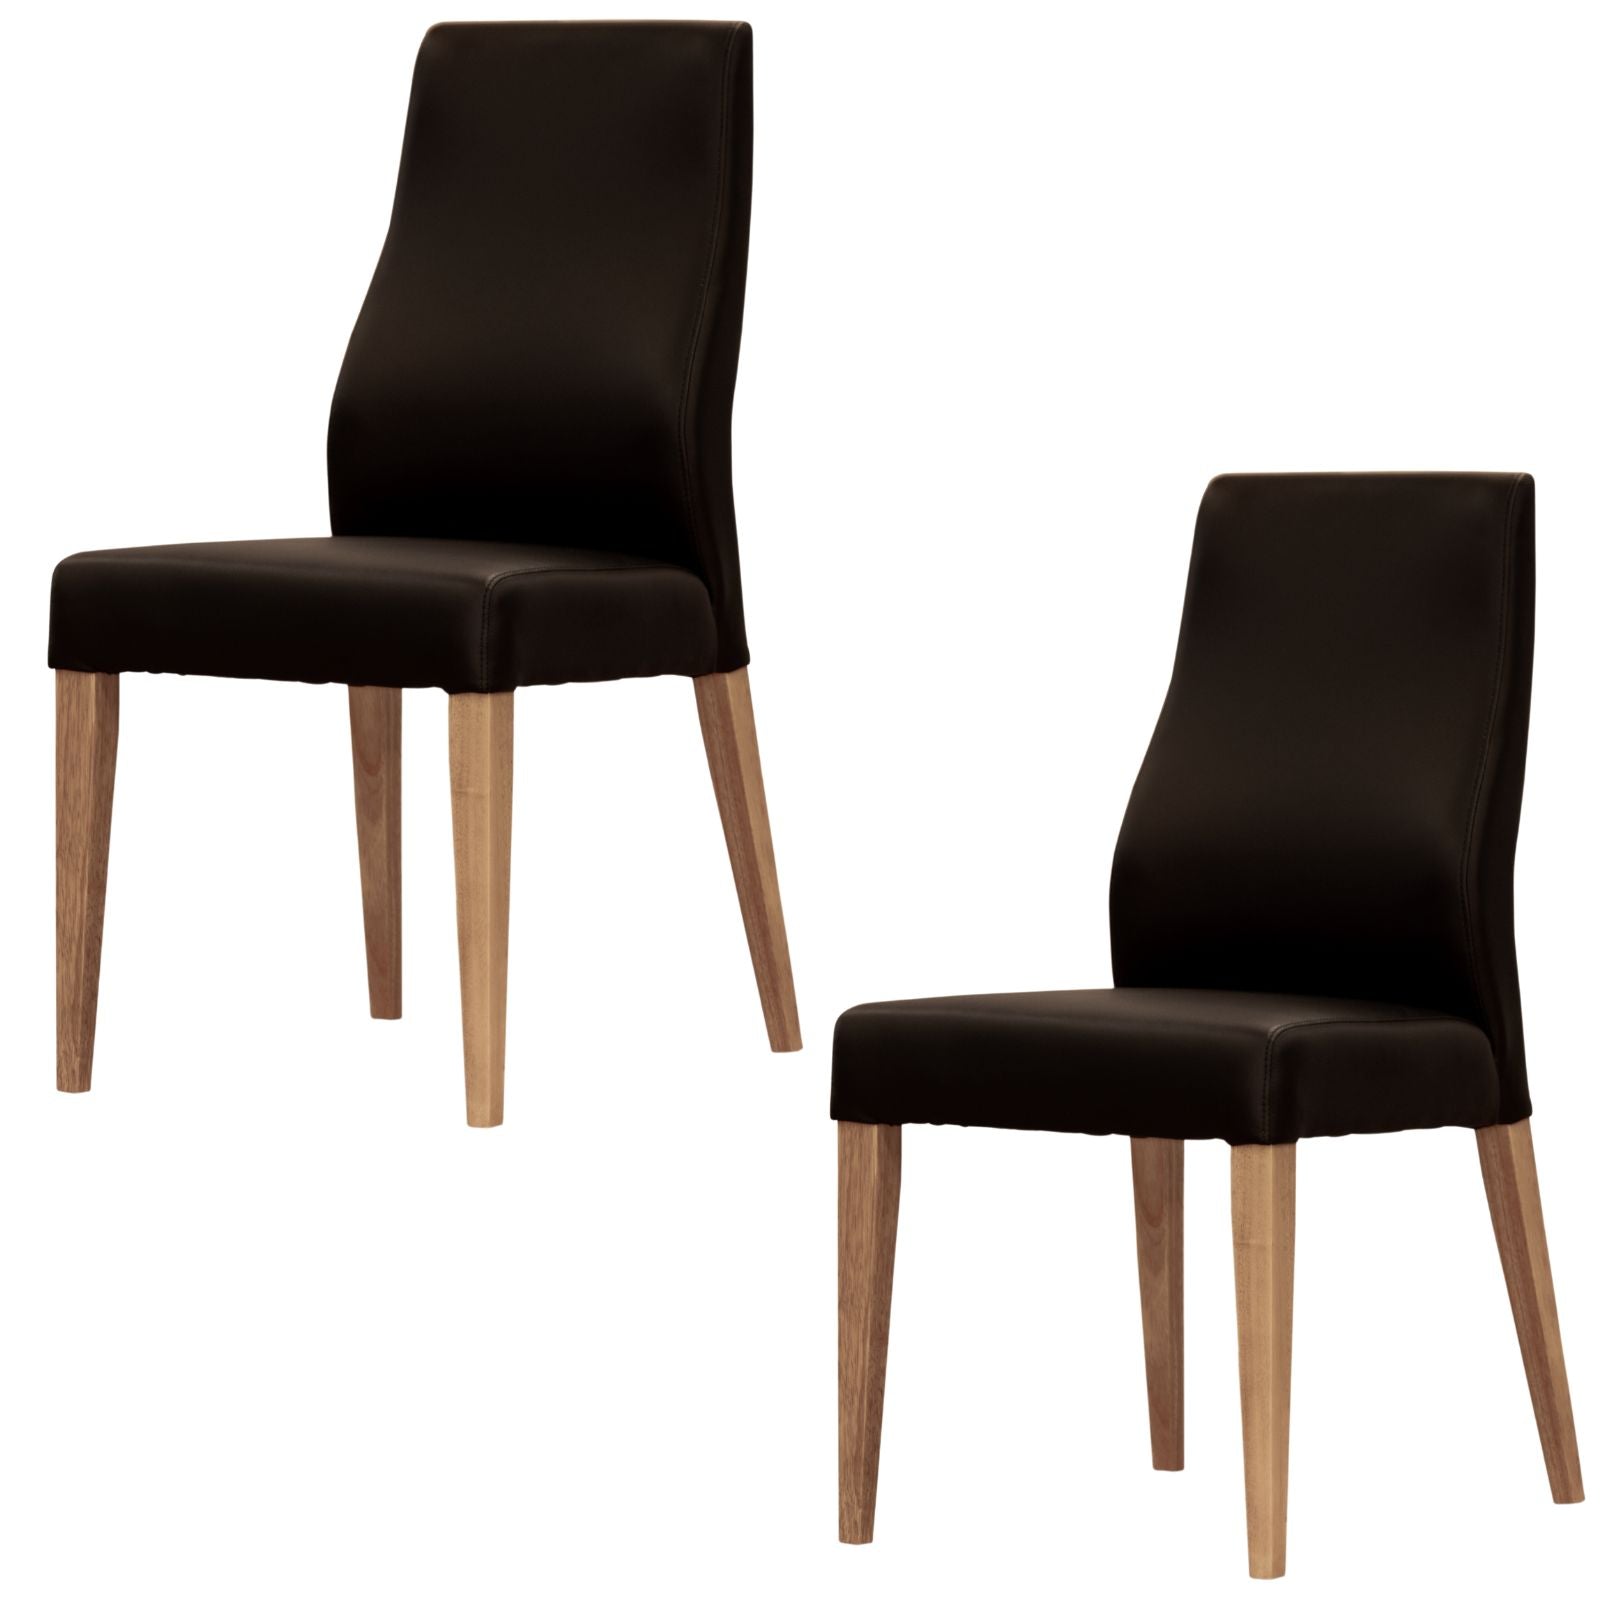 rosemallow-dining-chair-set-of-2-pu-leather-seat-solid-messmate-timber-black